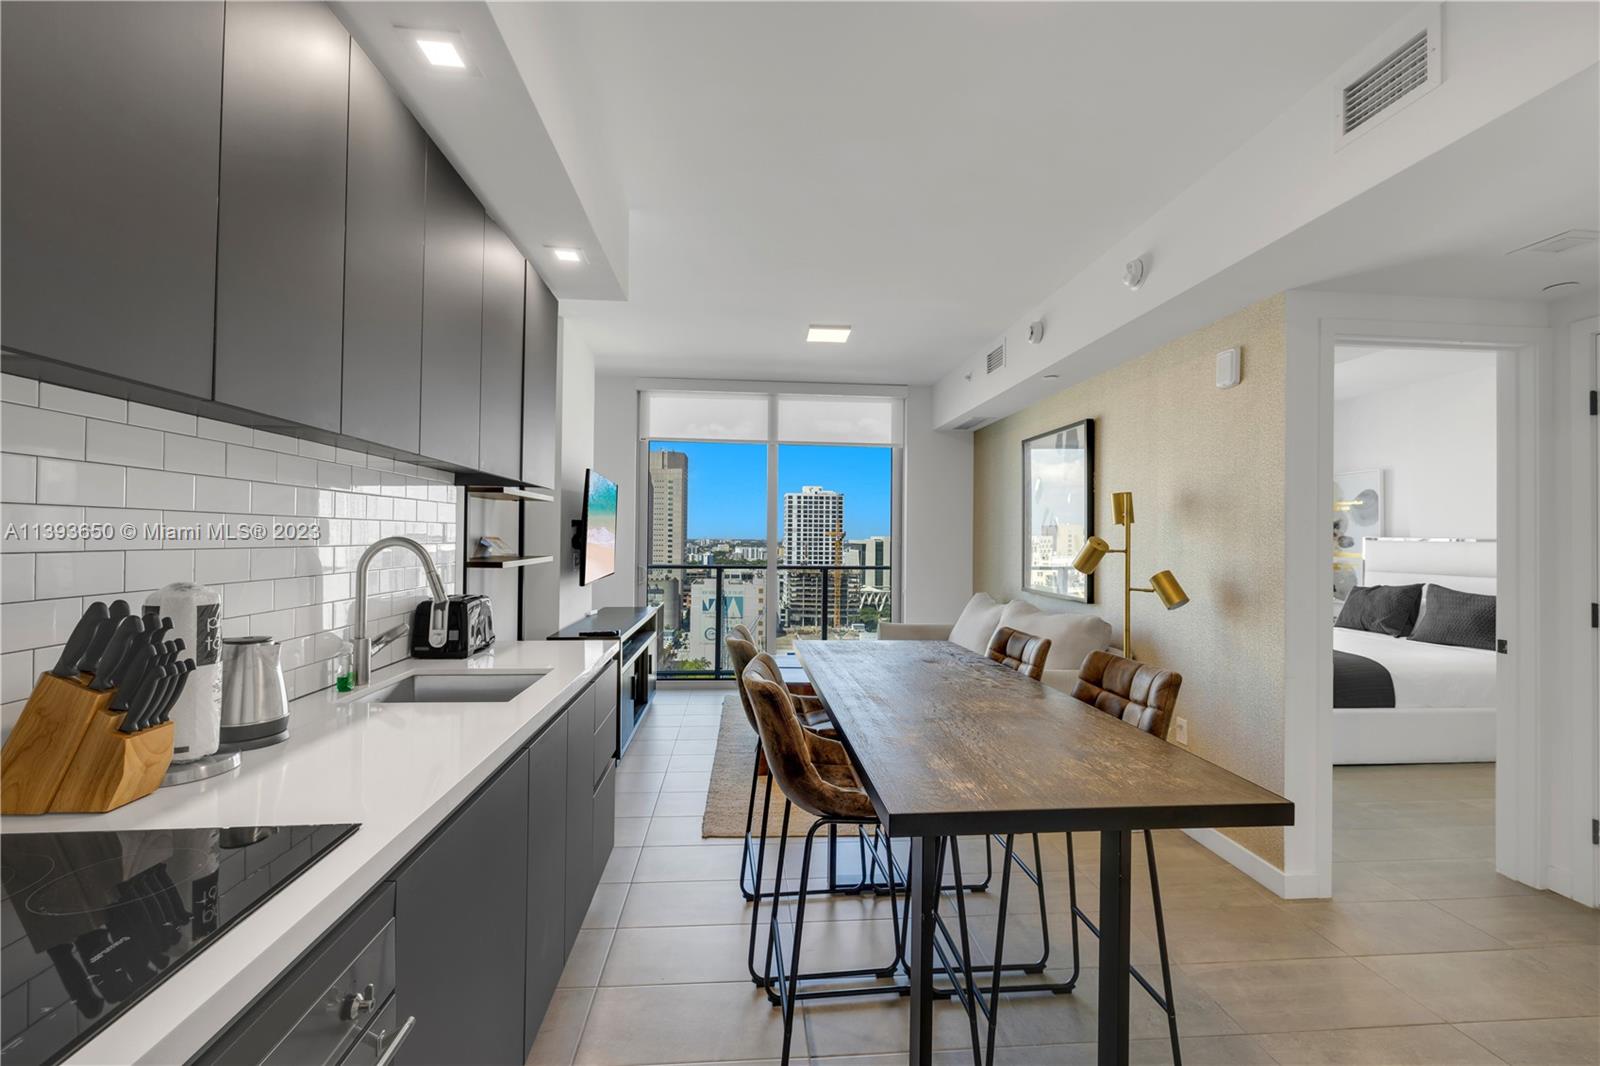 Stunning 1 bedroom, 1 bathroom unit located in the heart of Downtown Miami. Brand new amenities, beautiful outdoor pool on the 15th floor, gym, restaurant, bars, lounges and 24/7 security. Perfect investment for short term rentals. Don't miss out on this wonderful opportunity! Come see today!!